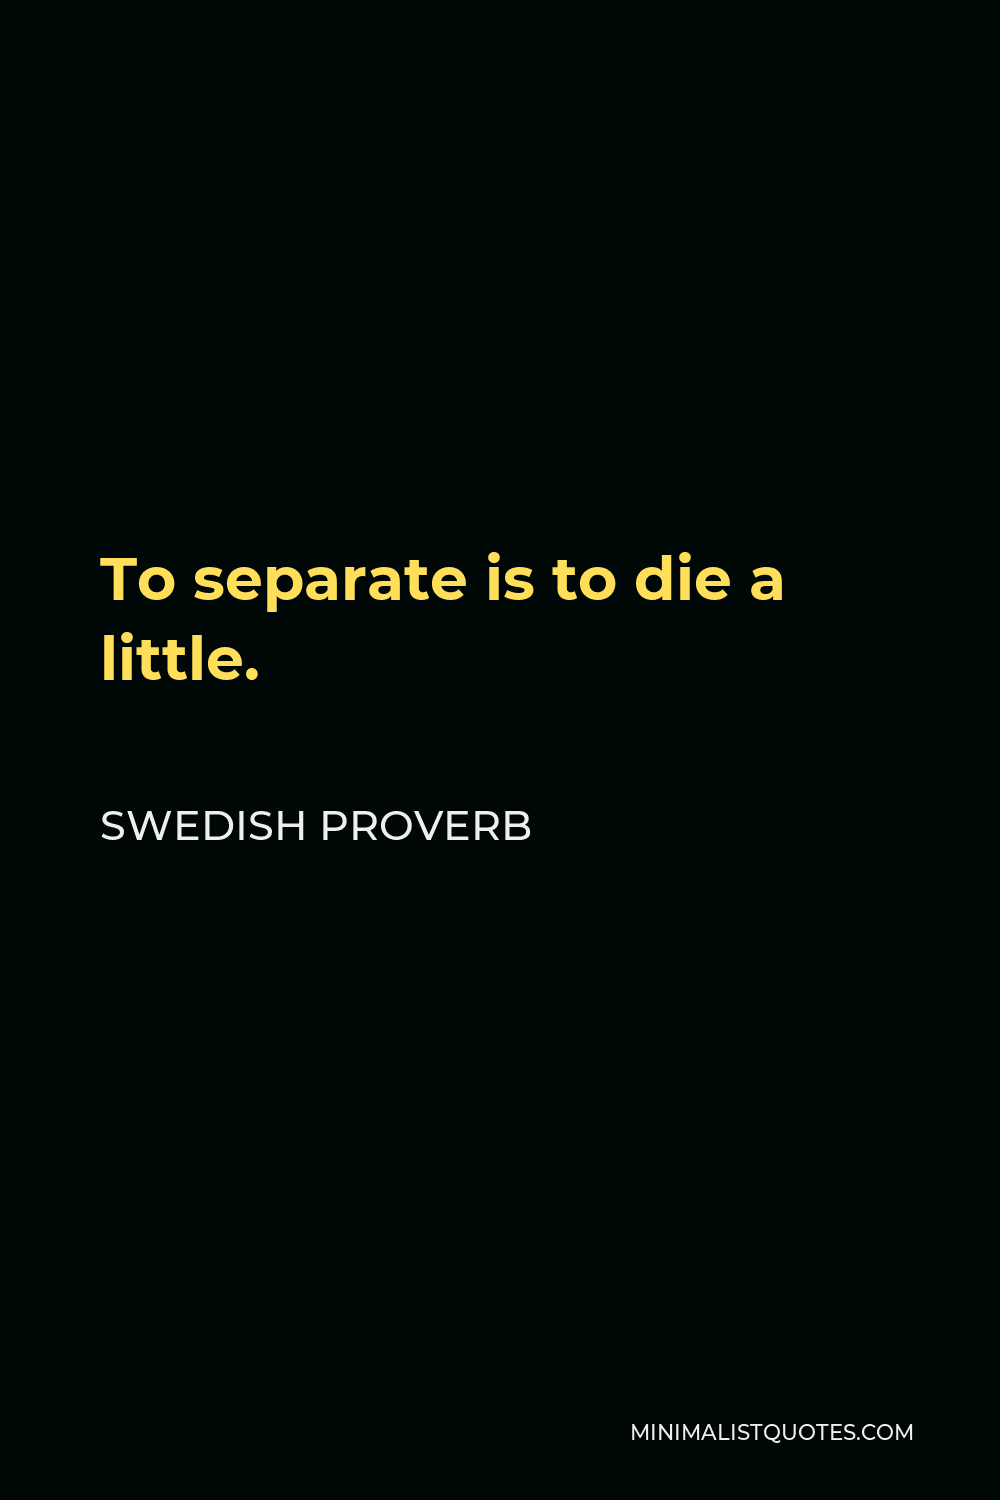 Swedish Proverb Quote - To separate is to die a little.